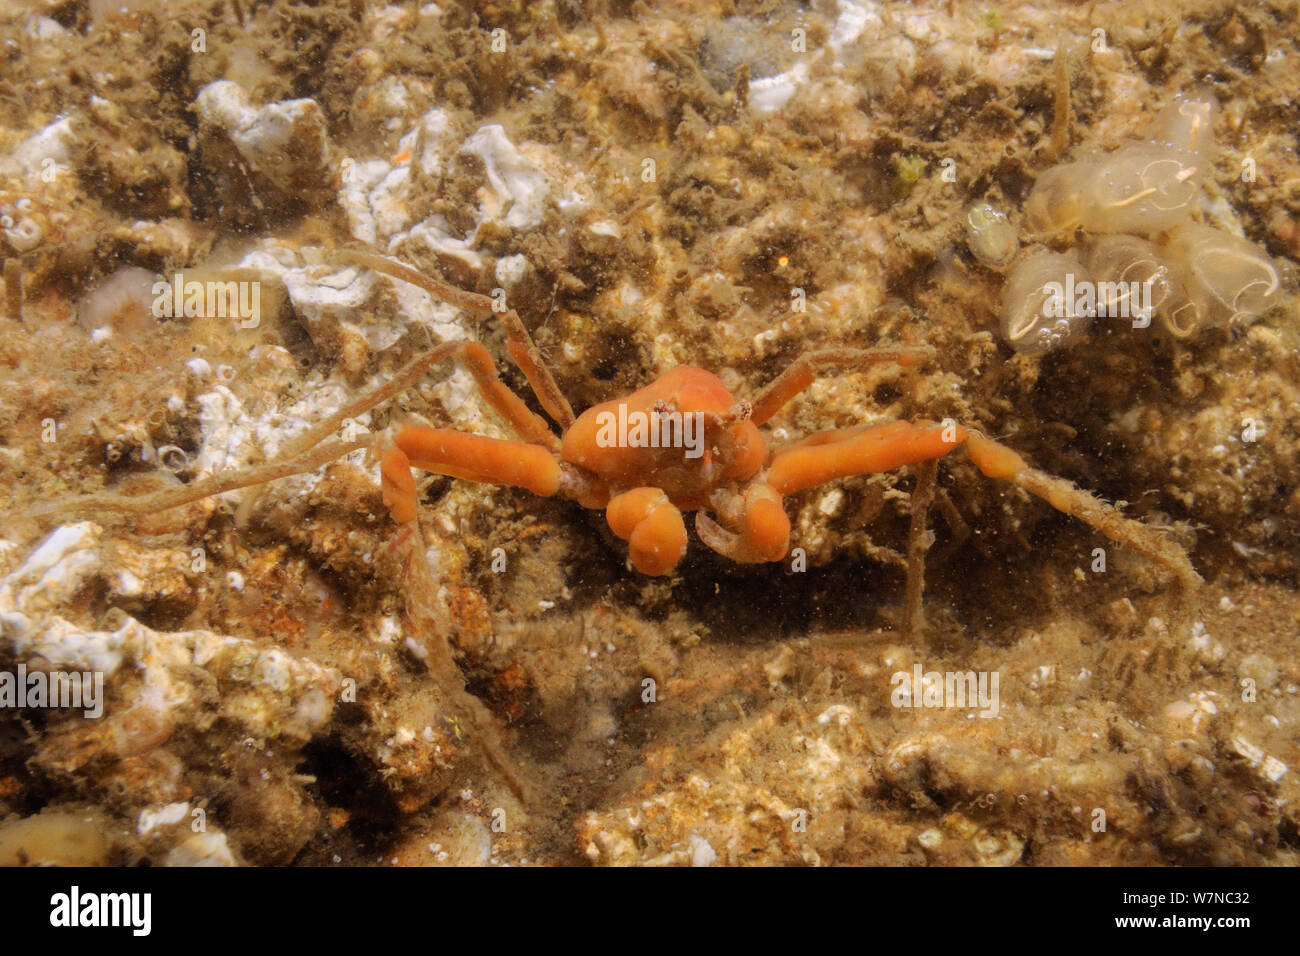 Sponge spider crab (Inachus sp.) covered in red sponge in a rockpool low on th shore alongside a group of Light bulb sea squirts (Clavellina lepadiformis), Helford River, Cornwall, UK, August. Stock Photo